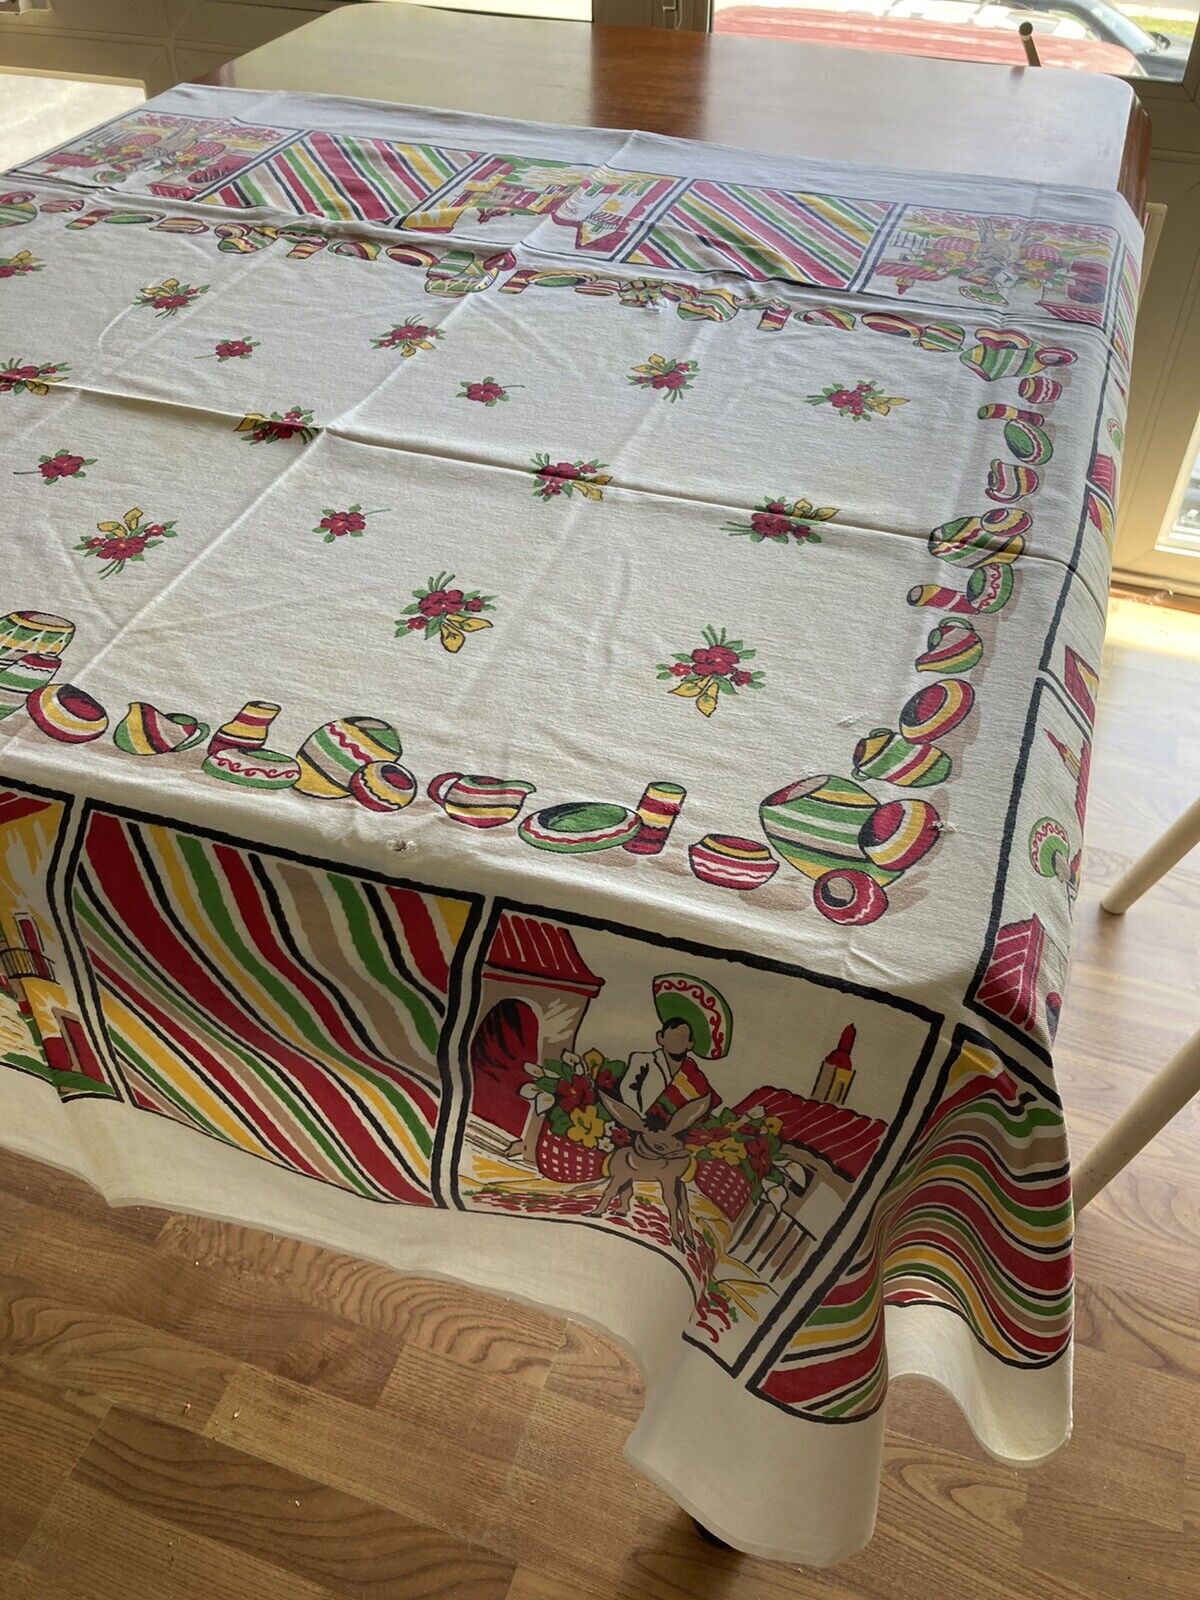 Vintage Retro Five Color Printed Tablecloth South West Inspired 54 x 62